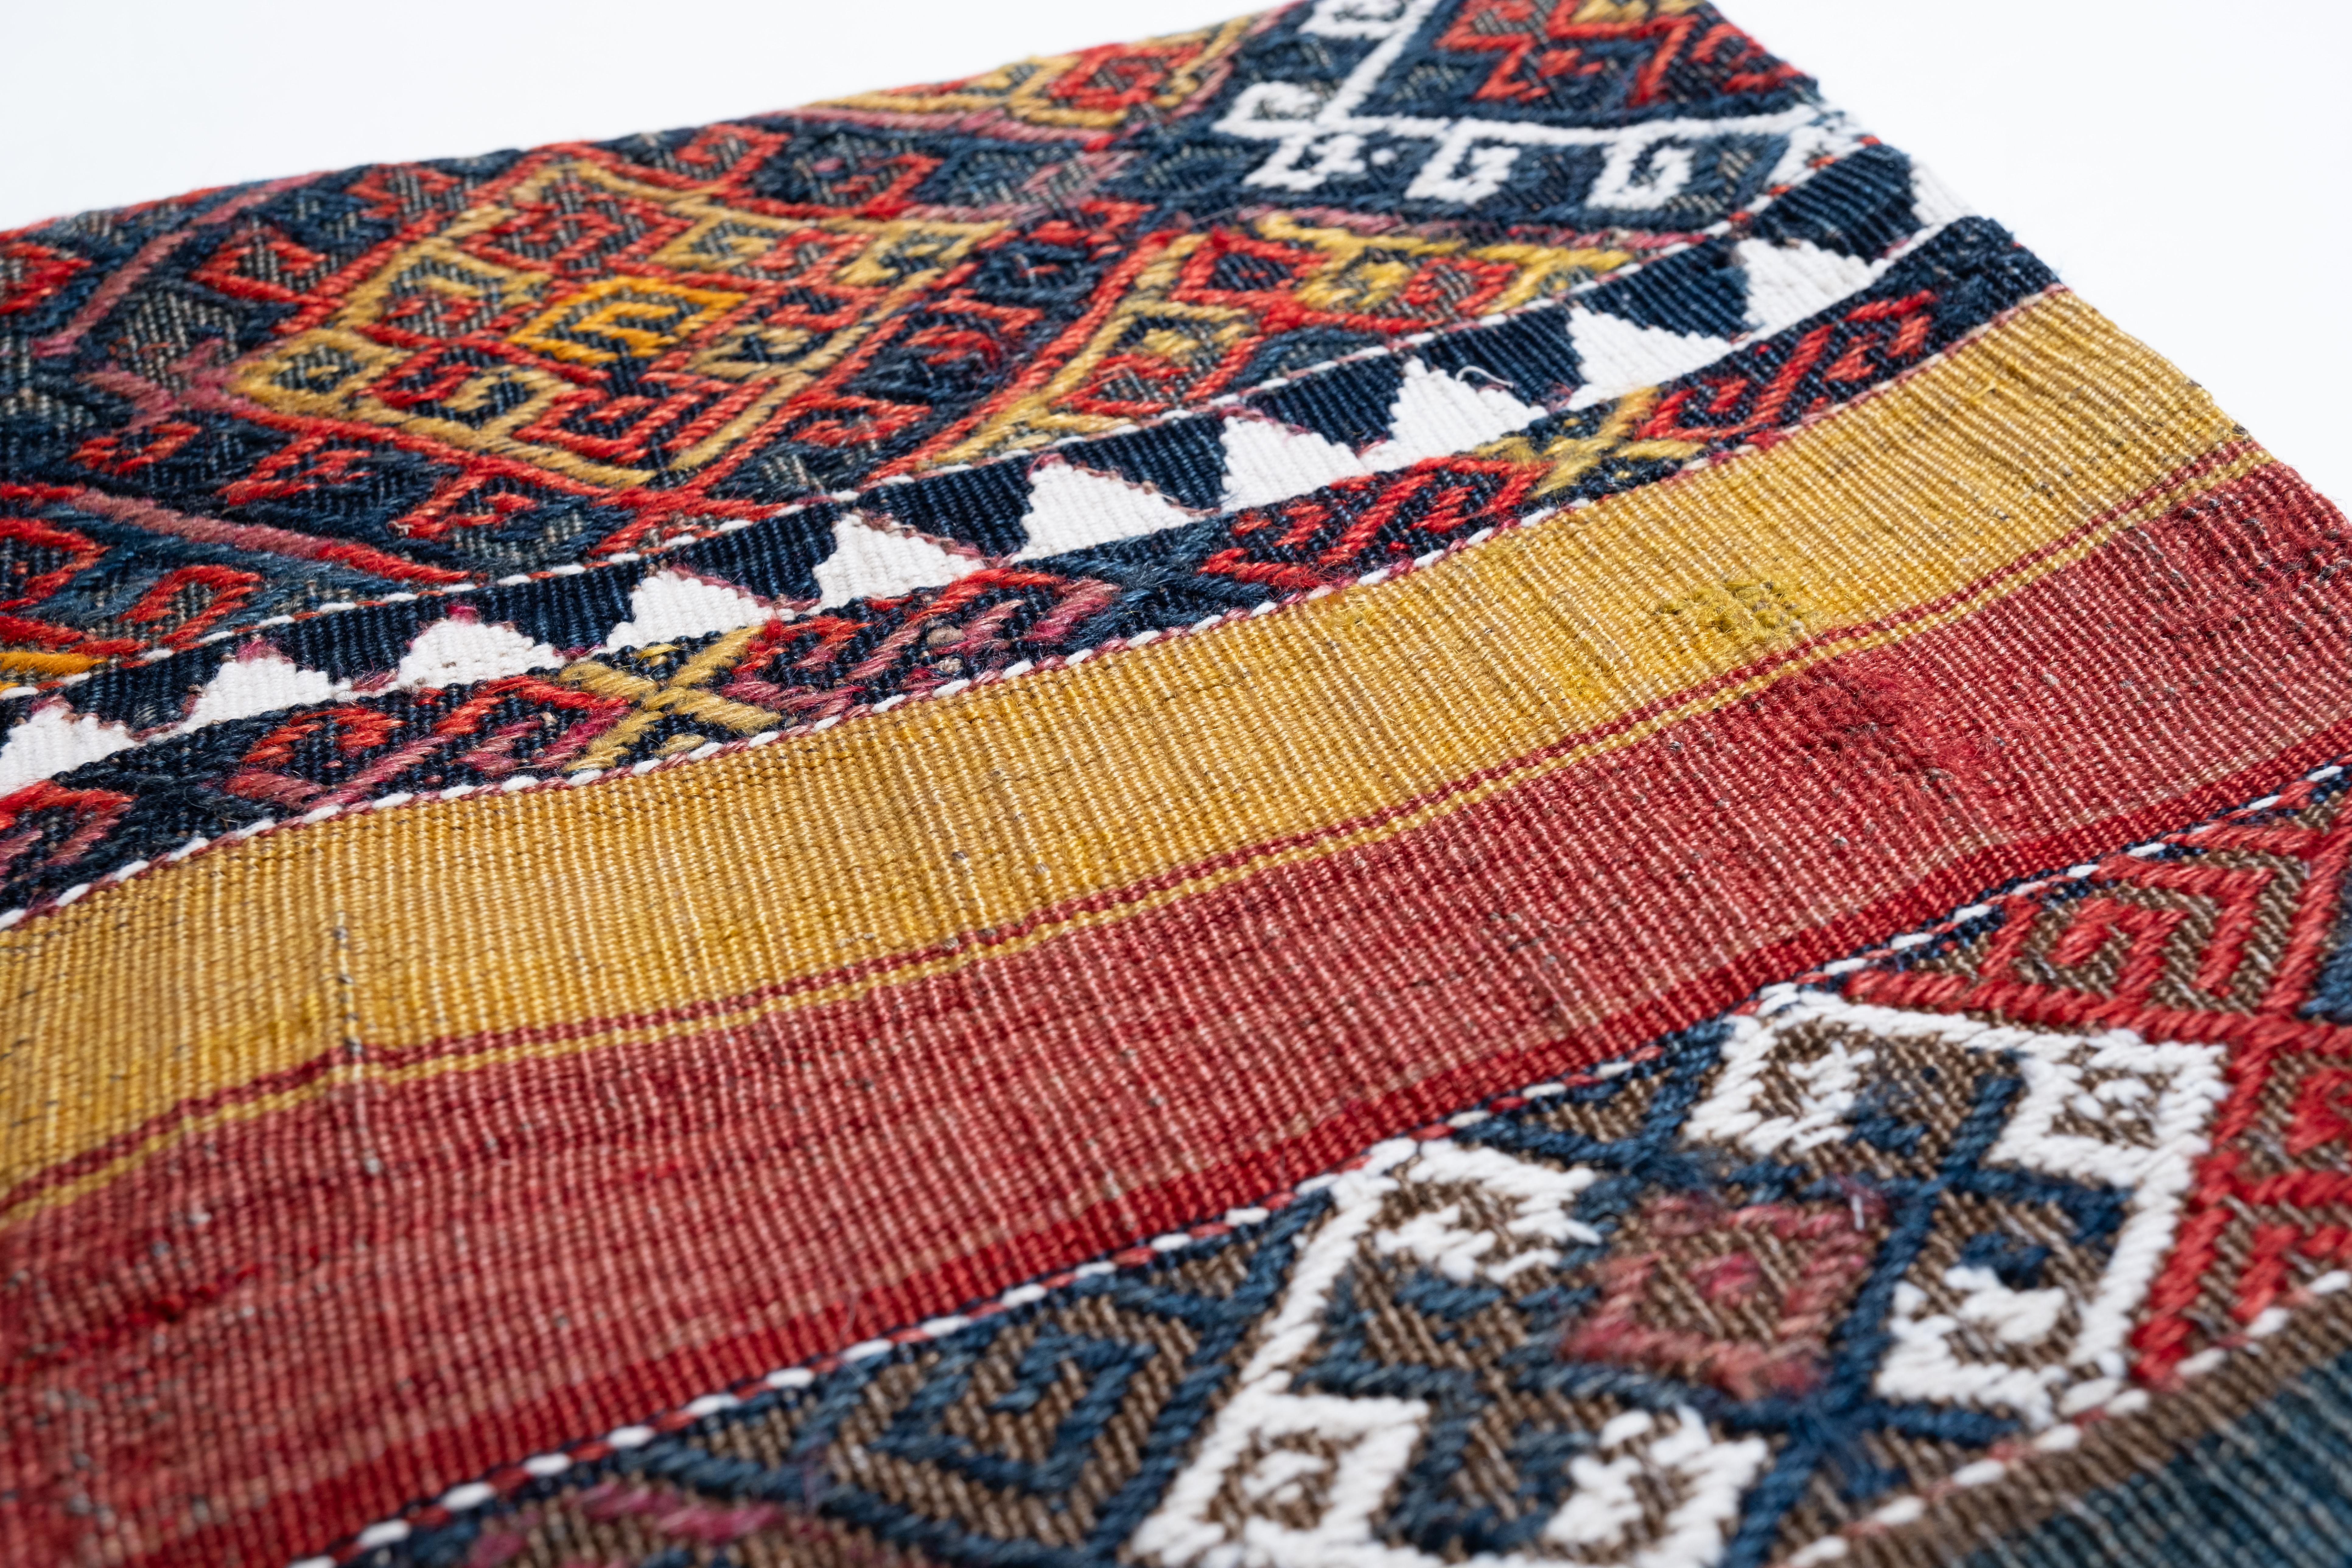 Hand-Knotted Vintage & Old Kilim Cushion Cover, Anatolian Yastik Turkish Modern Pillow 4475 For Sale